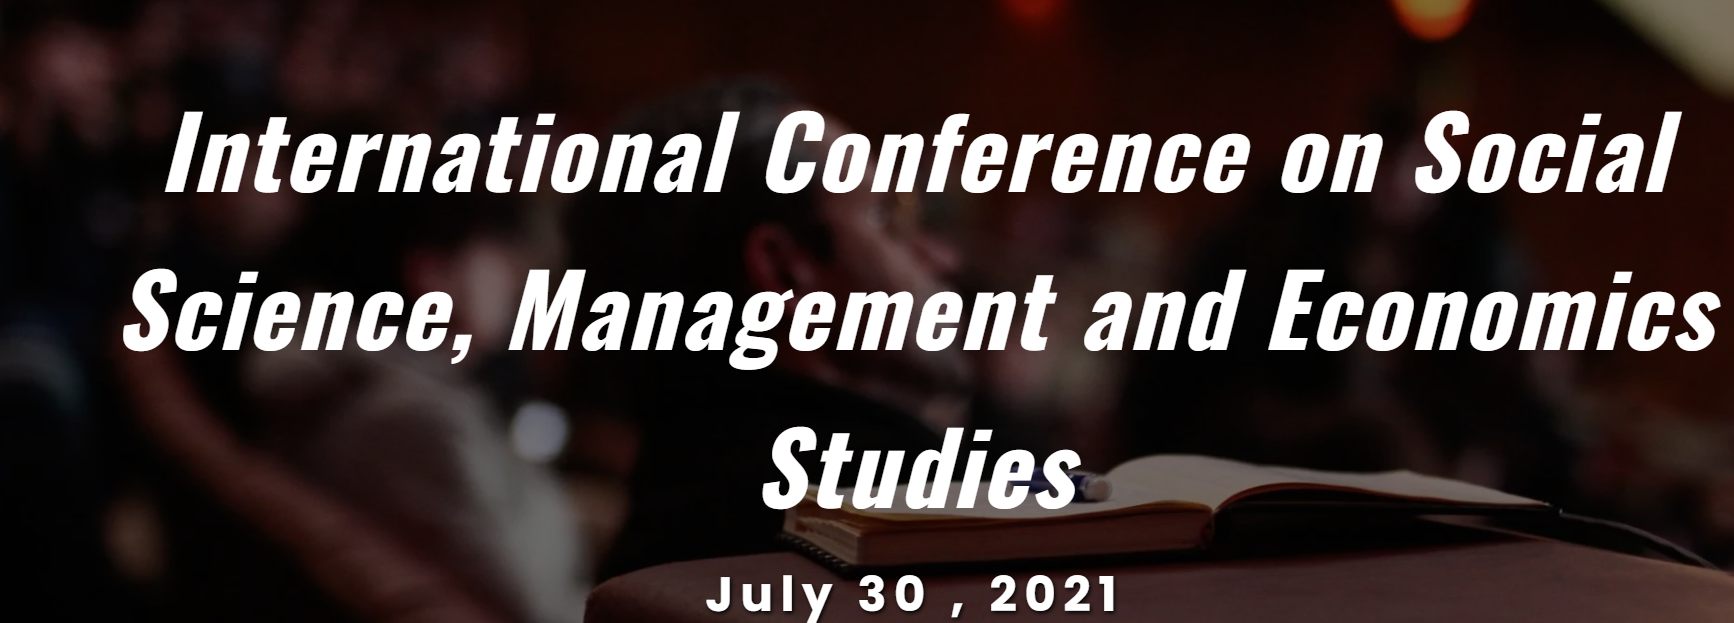 International Conference on Social Science, Management and Economics Studies, Madrid, Spain, Spain